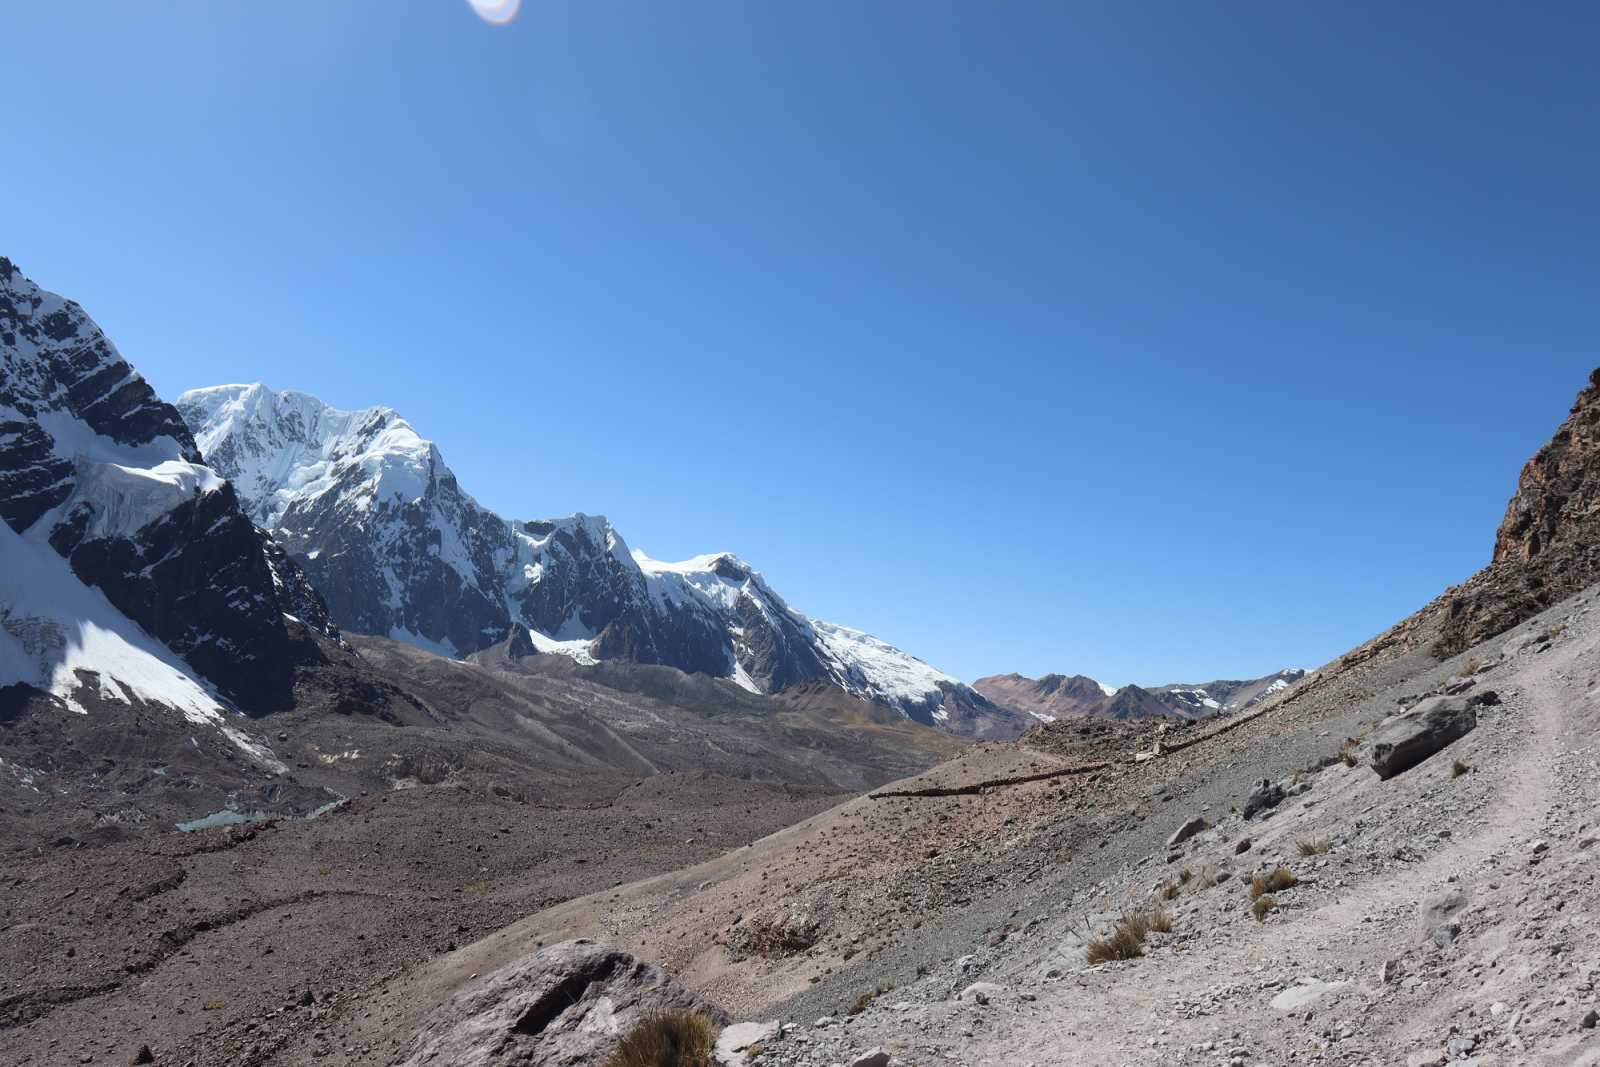 The Jampa pass 5100 m is the last pass of the Ausangate trek